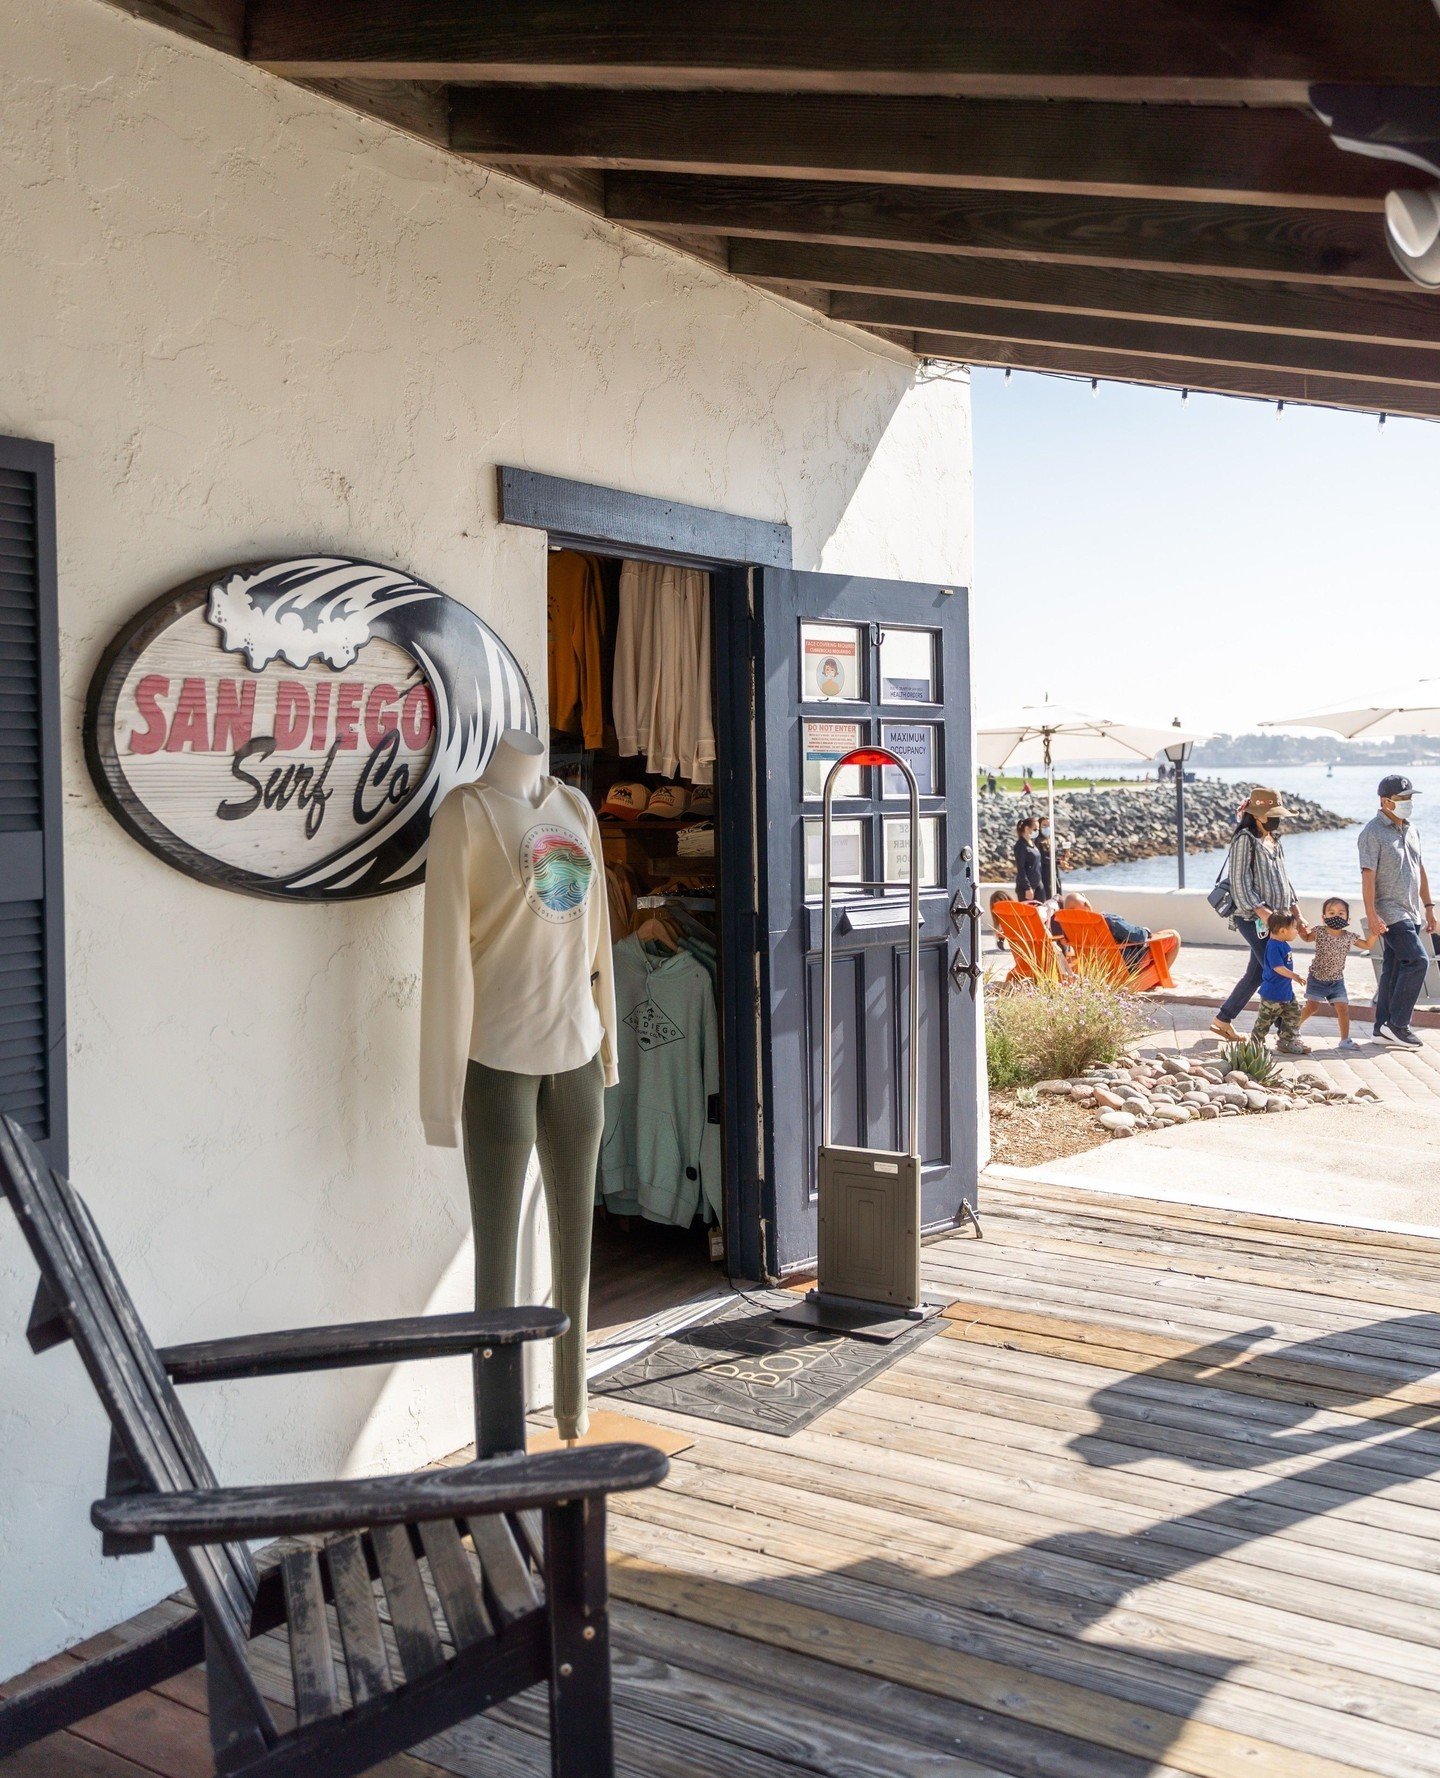 T-shirts, shoes, animal figurines, children's books, board games-- you name it, we got it! Here is part 3 of unique businesses you can find here at Seaport Village. ⁠
⁠
📍San Diego Surf Co. ⁠
📍Safari Animal Collection⁠
📍Geppetto's⁠
📍Harley Davidso